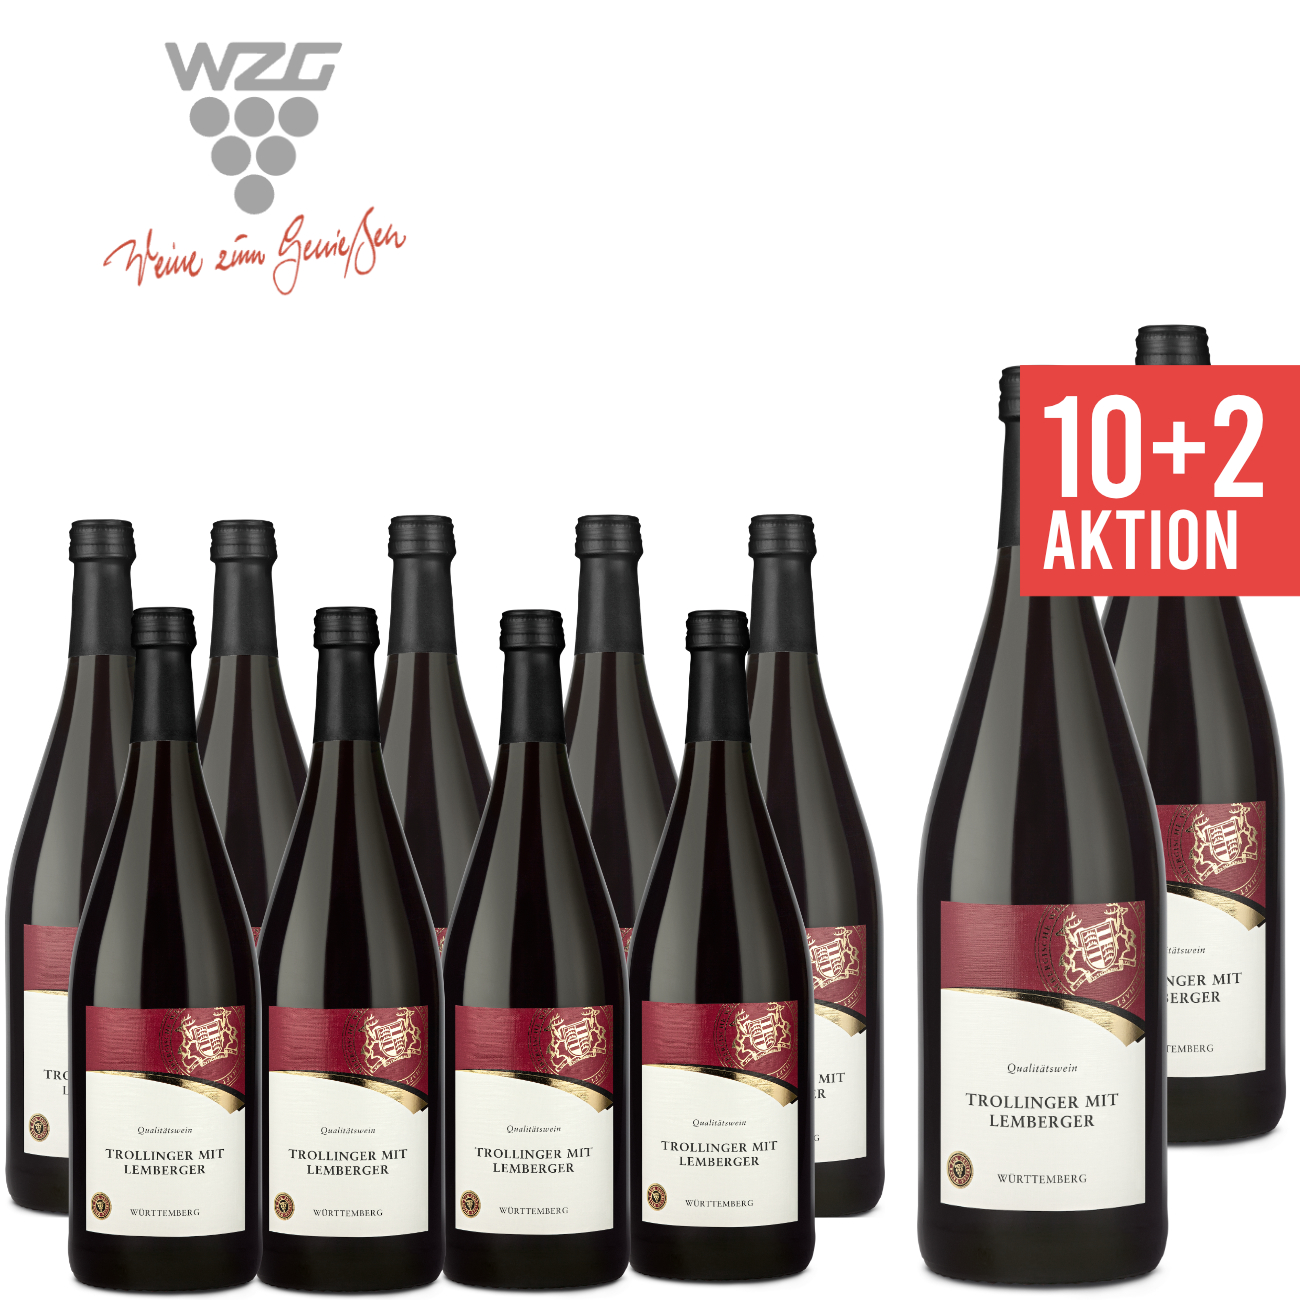 wines Find+Buy wein.plus The | Find+Buy: wein.plus our members of